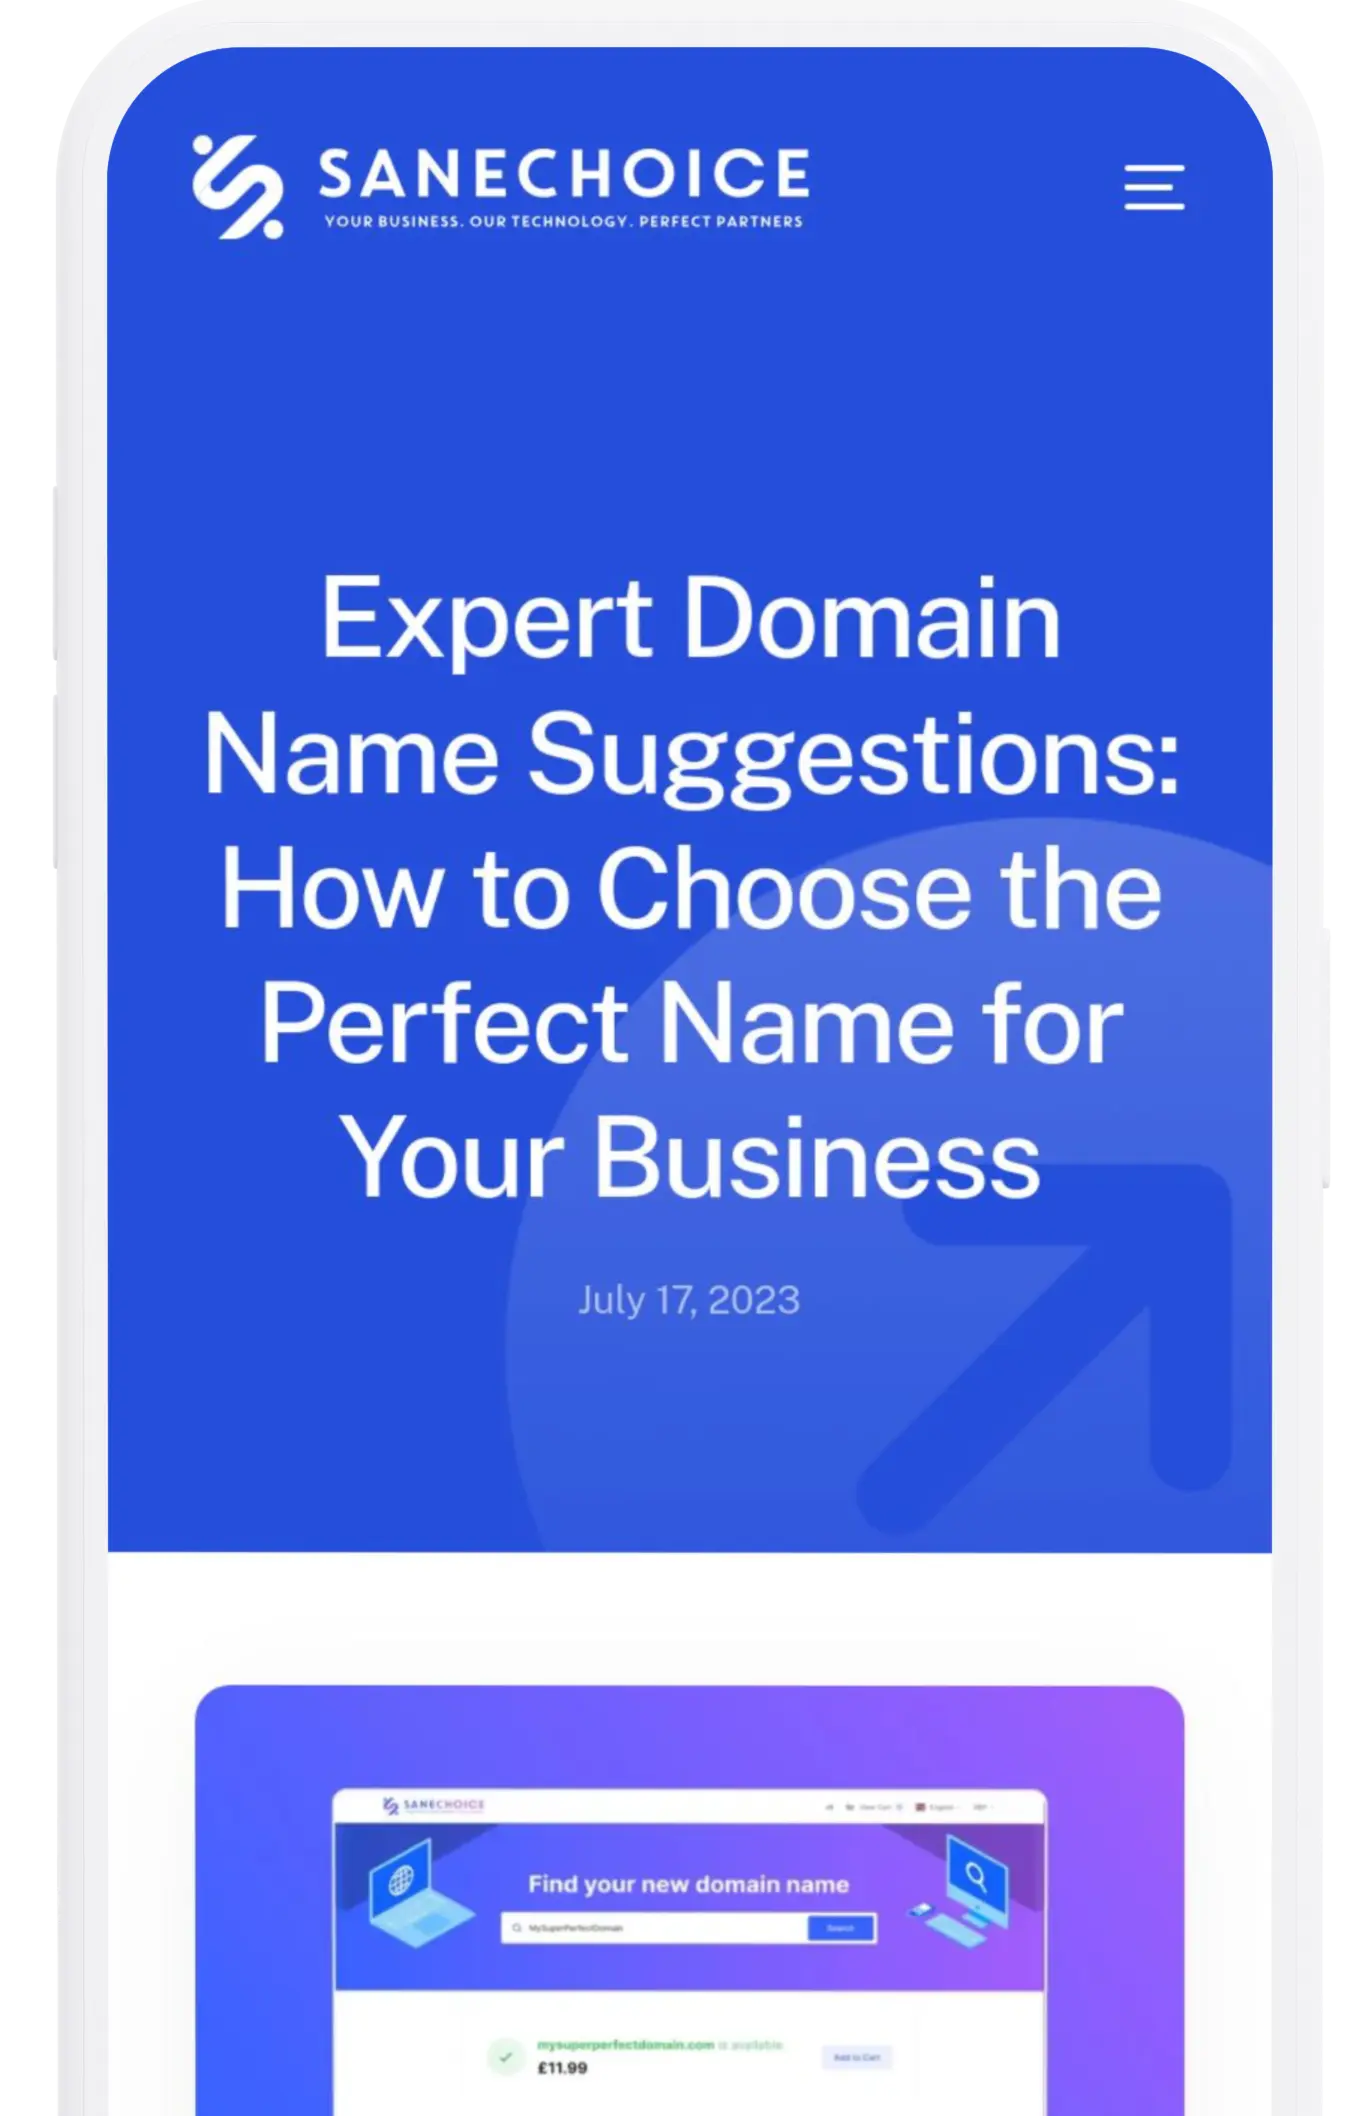 Get tips on choosing the perfect domain name.